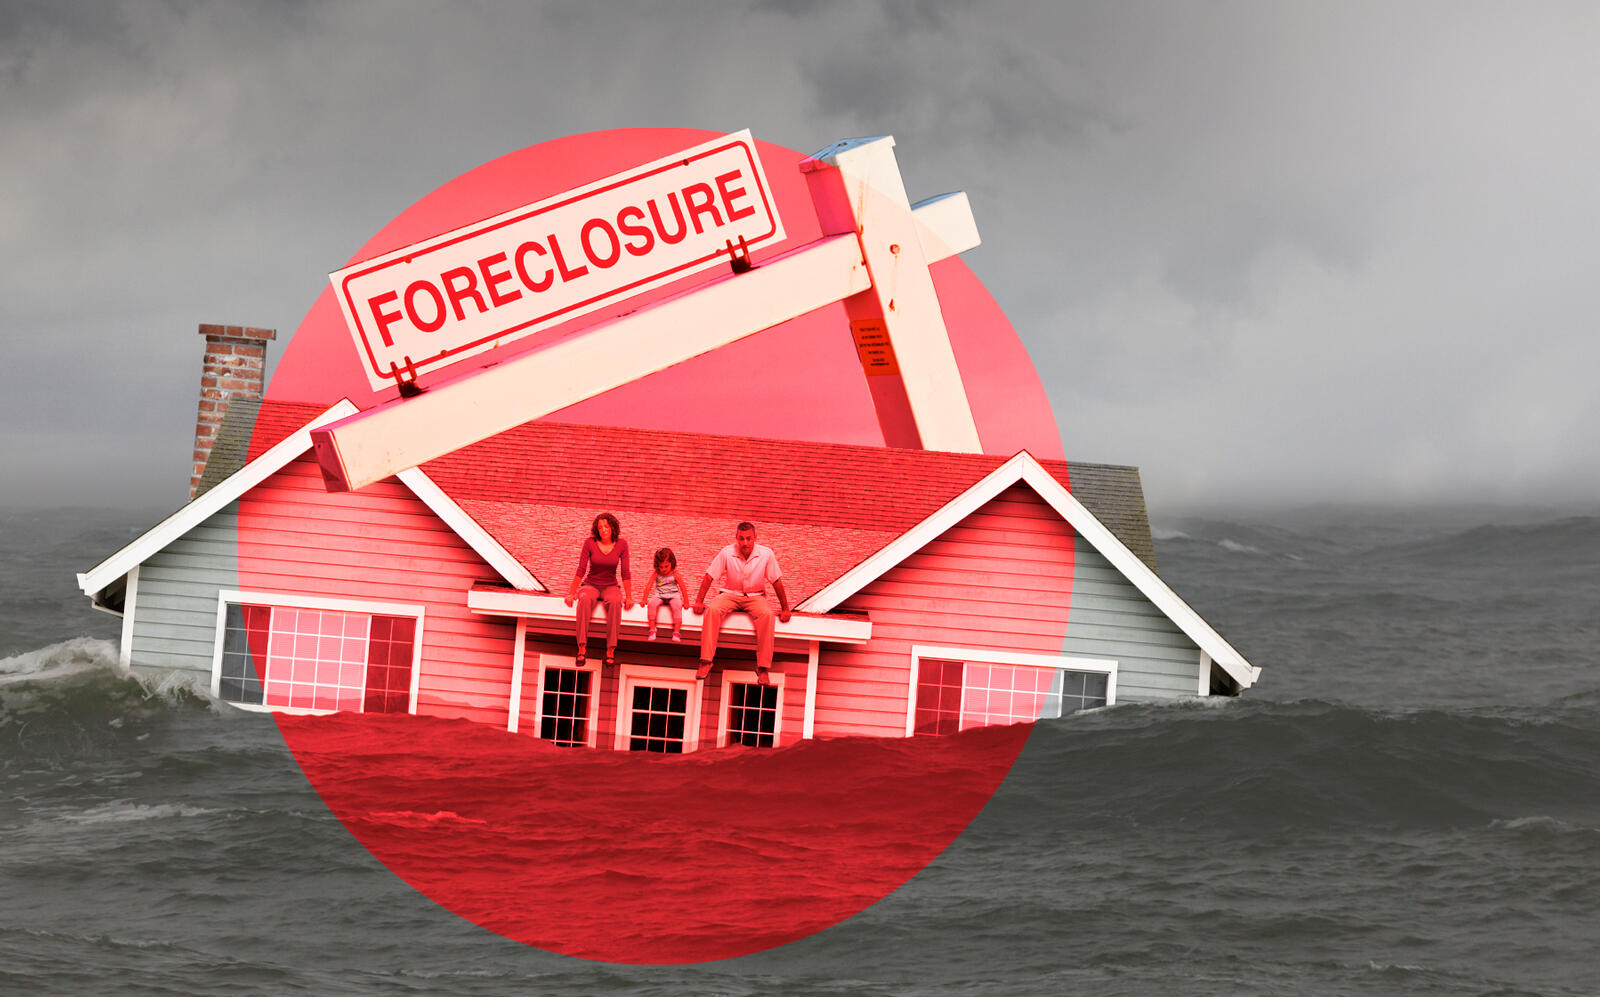  An industry report says that mortgage lenders and investors are ill-prepared for the growing challenge of climate risk. (iStock)